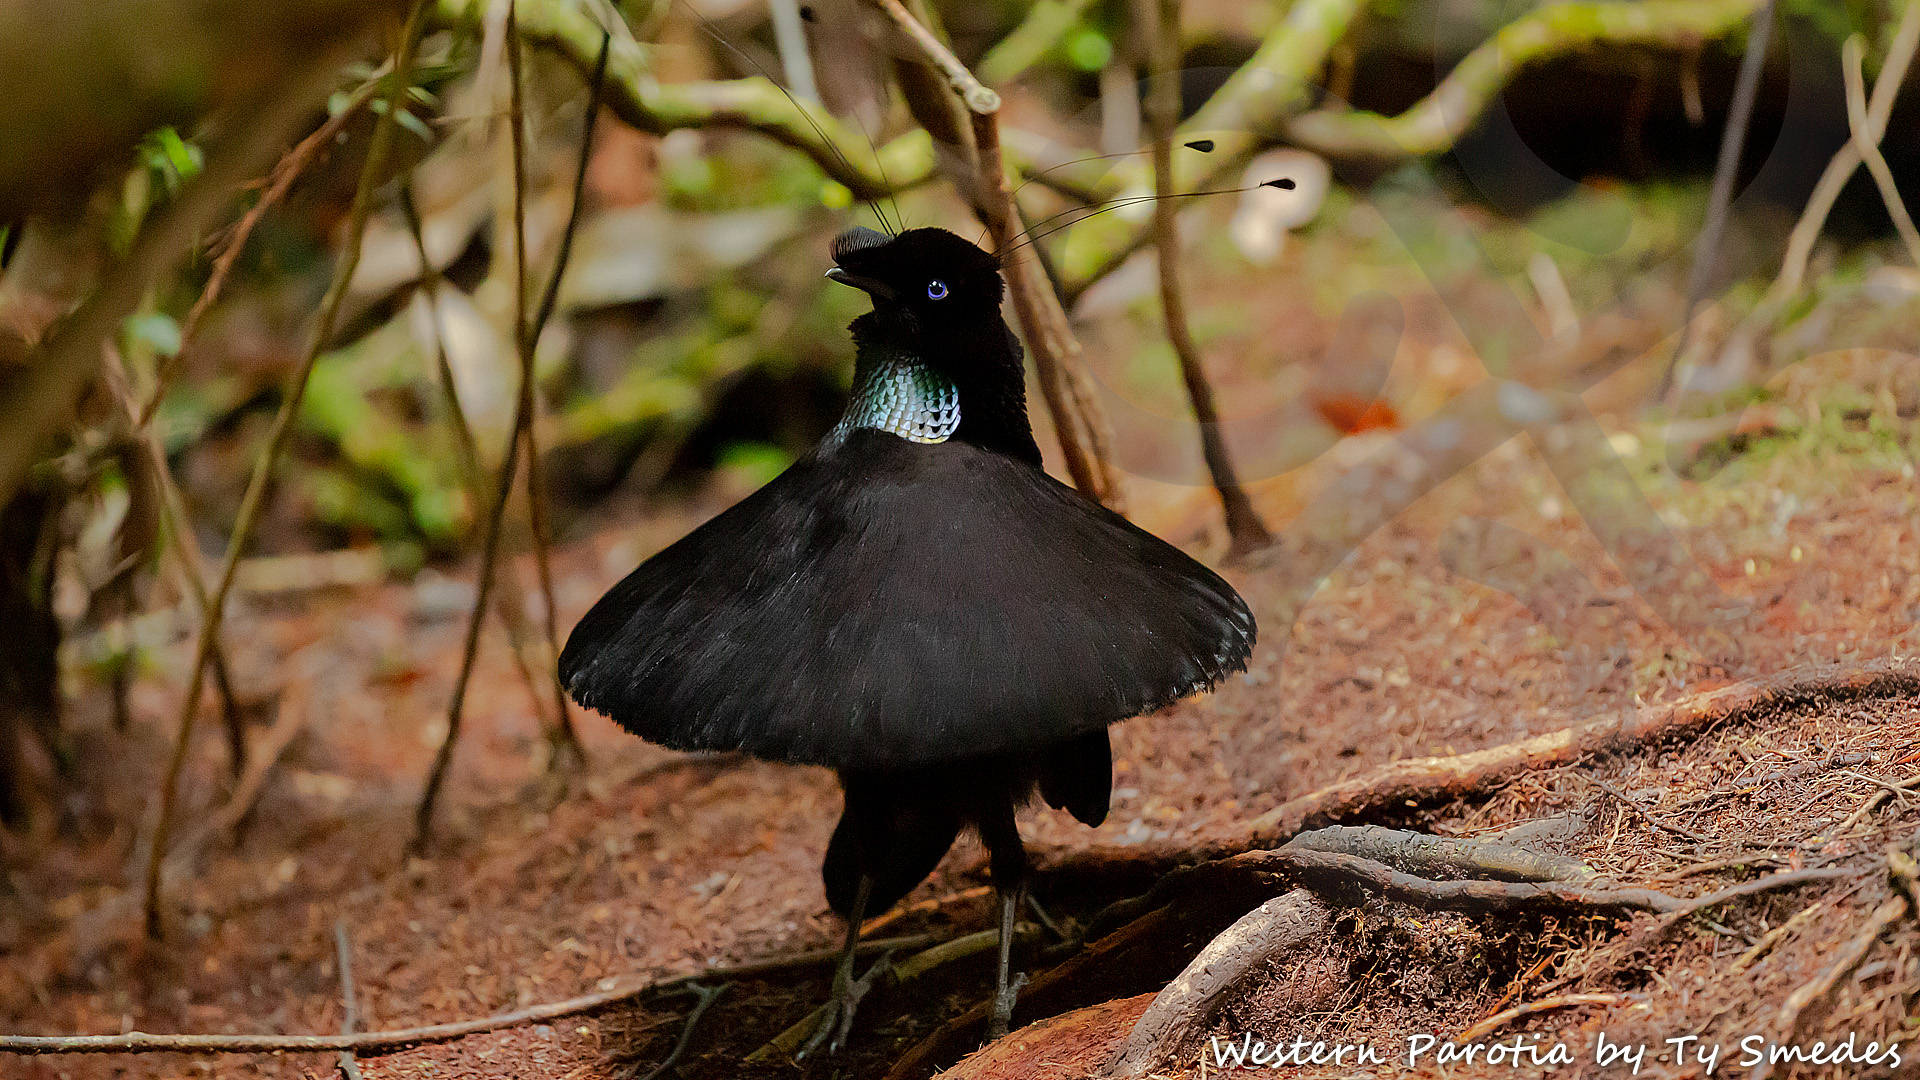 The ballerina-display of the adult male Western Parotia Parotia sefilata on its meticulously cleared ground court has to be witnessed to be believed. This amazing bird-of-paradise is but one of 61 bird species endemic to West Papua, where it occurs at mid-elevations in the Arfak, Tamrau and Wandammen Mountains. Copyright © Ty Smedes